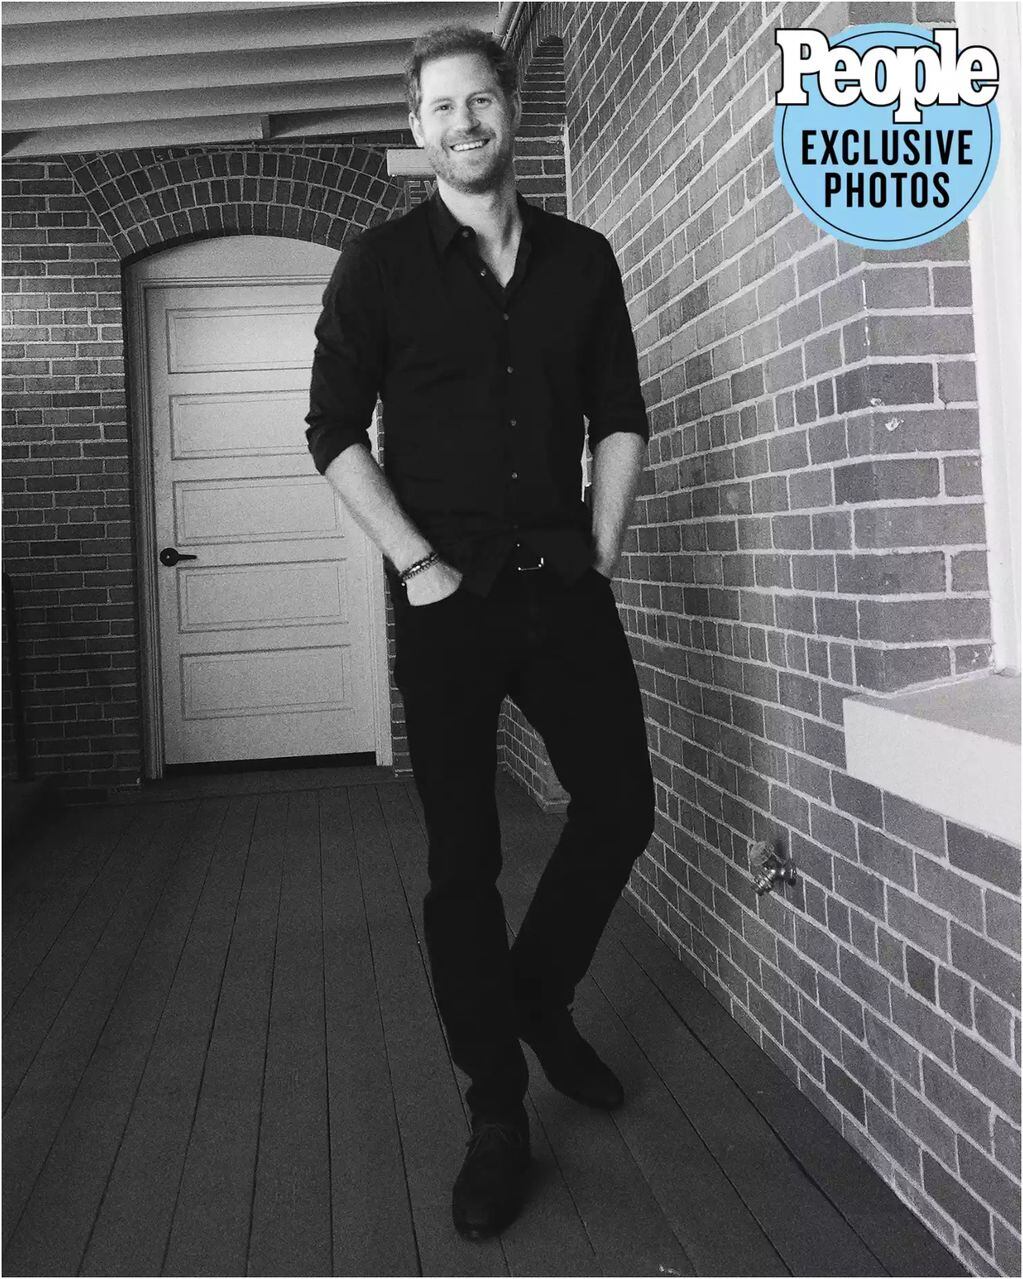 Prince Harry for People magazine